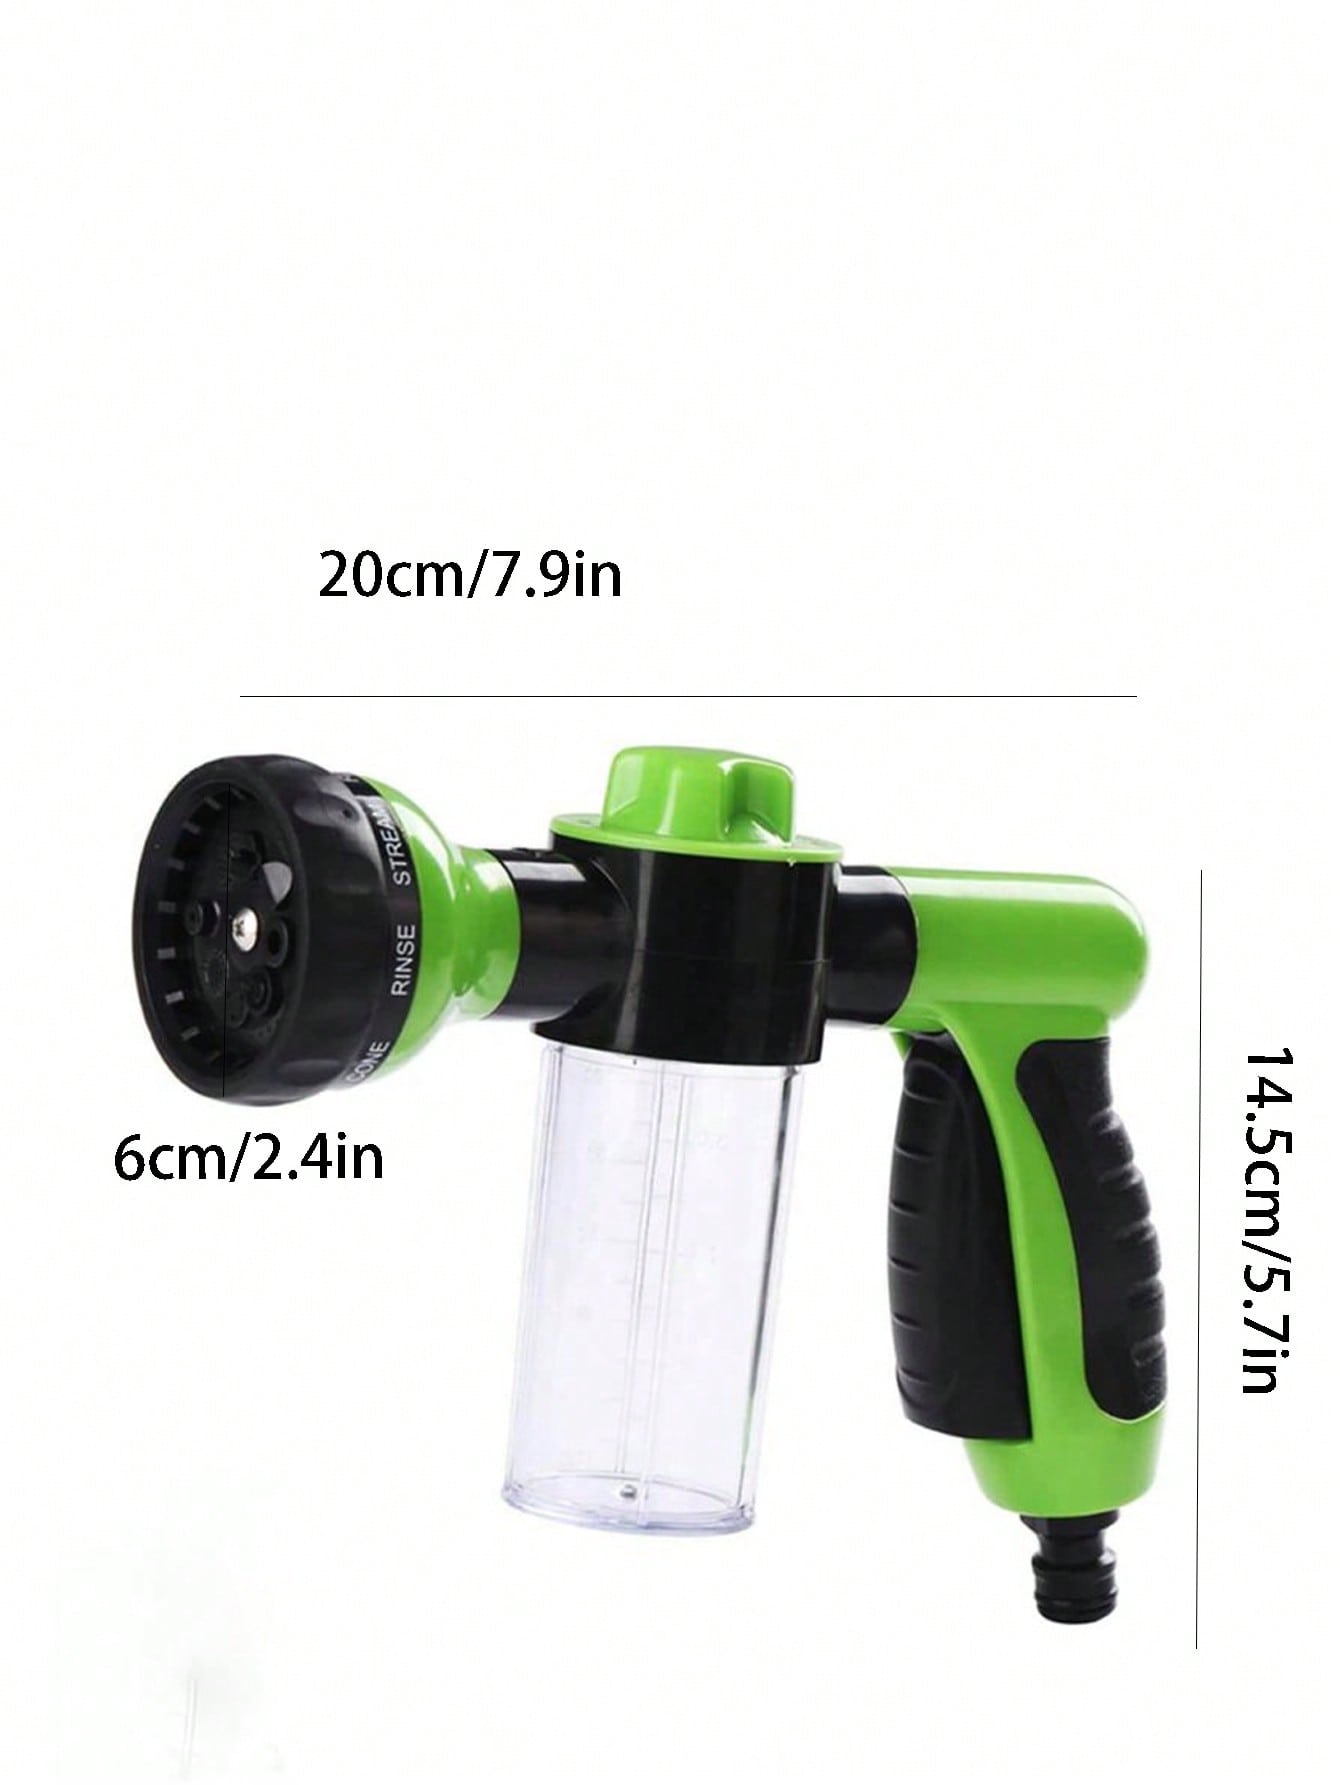 1pc Pet Shower Spray Head Attachment, Multifunctional Garden Watering Nozzle For Bathing/Washing Car, Suitable For Large Dogs/Cats